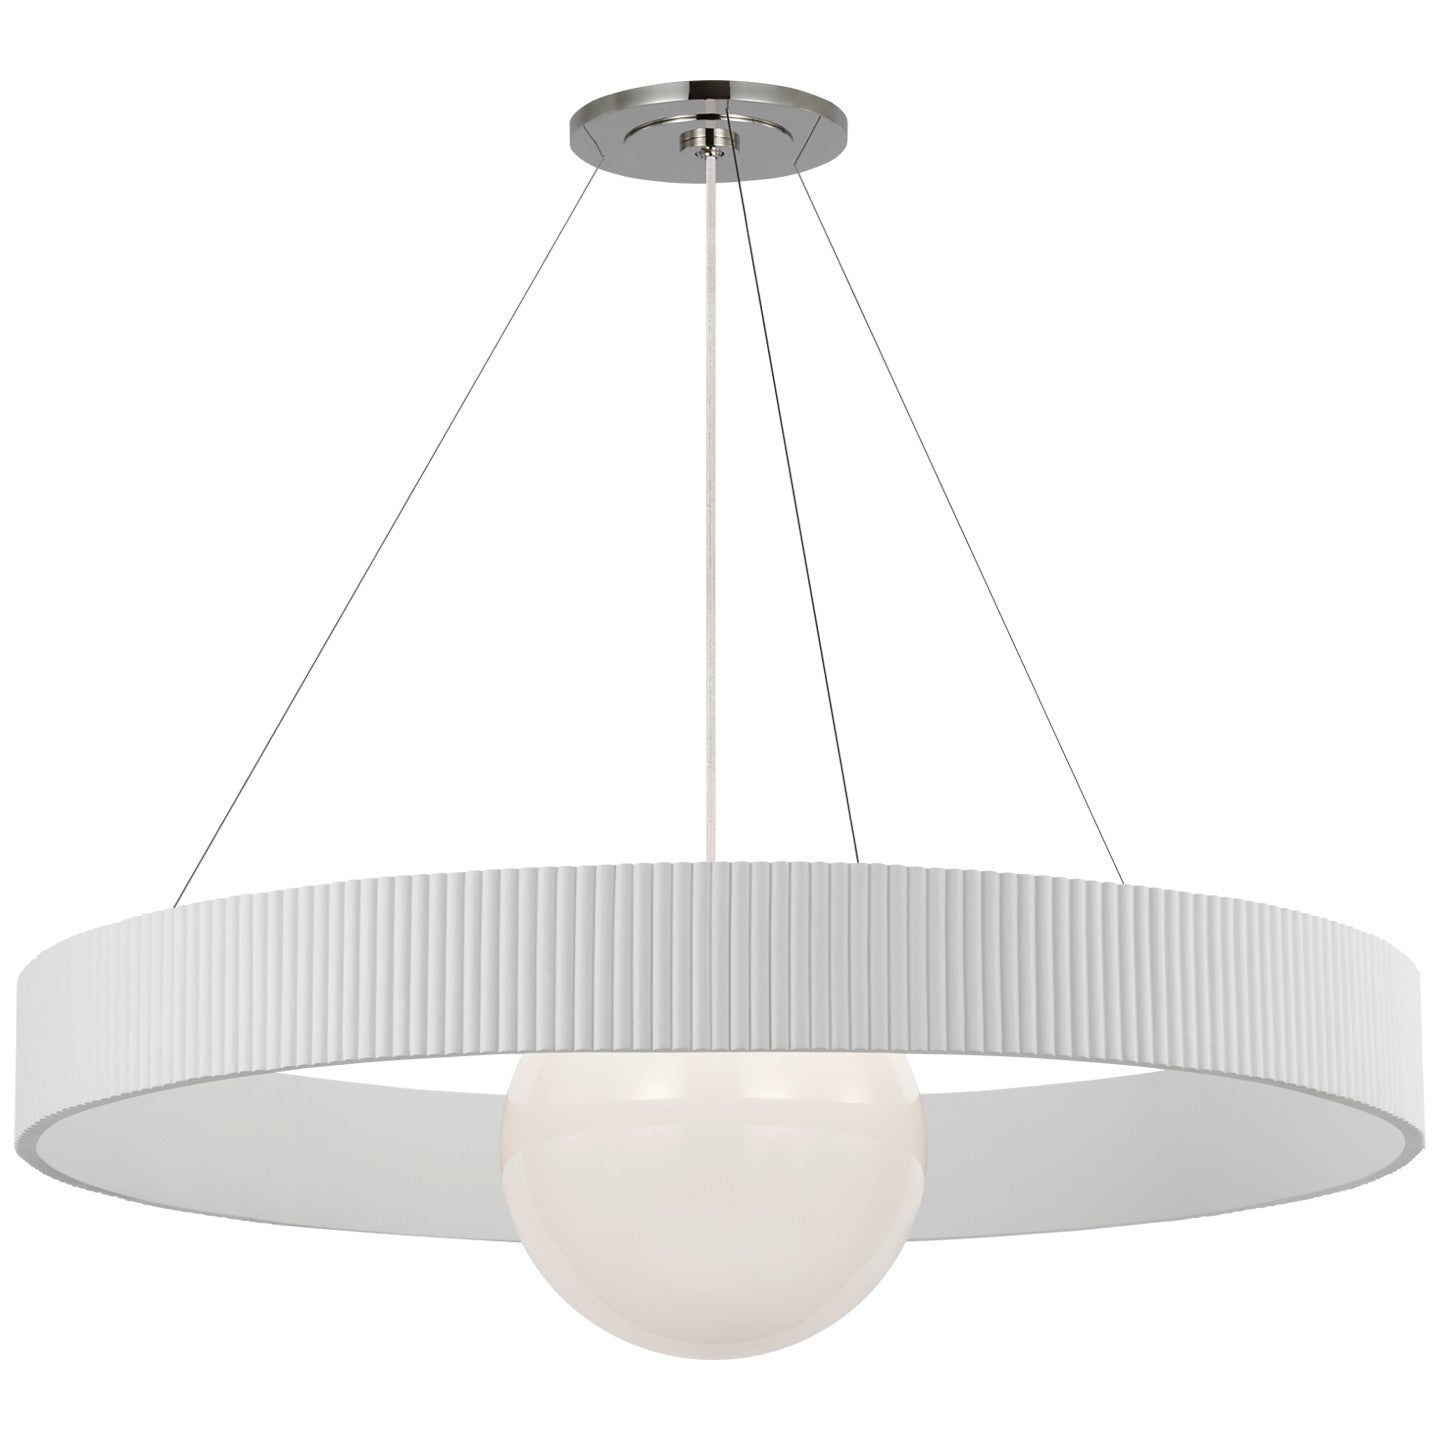 Visual Comfort Signature - WS 5001PN/WHT-WG - LED Chandelier - Arena - Polished Nickel and White Glass